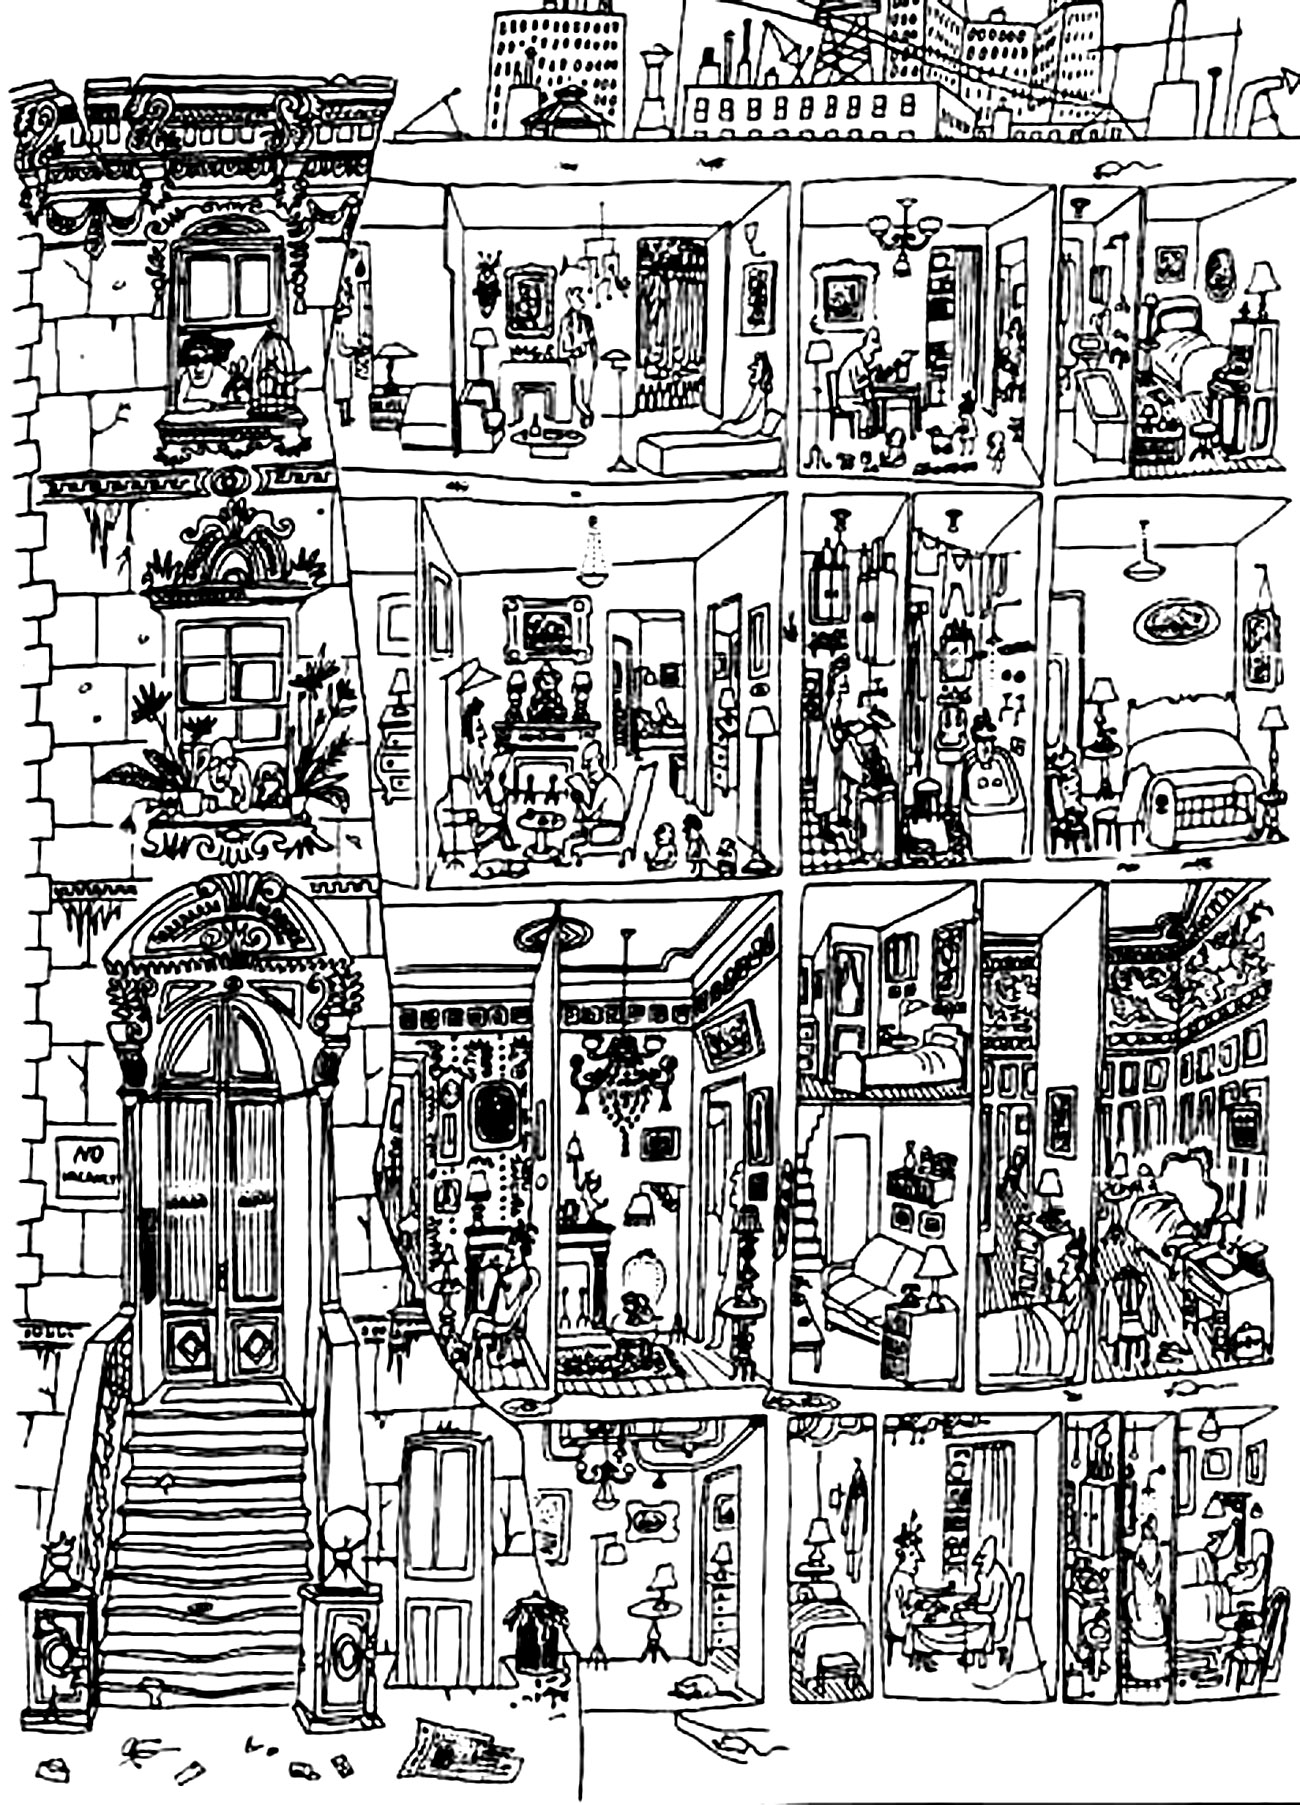 Rooming house by Saul Steinberg